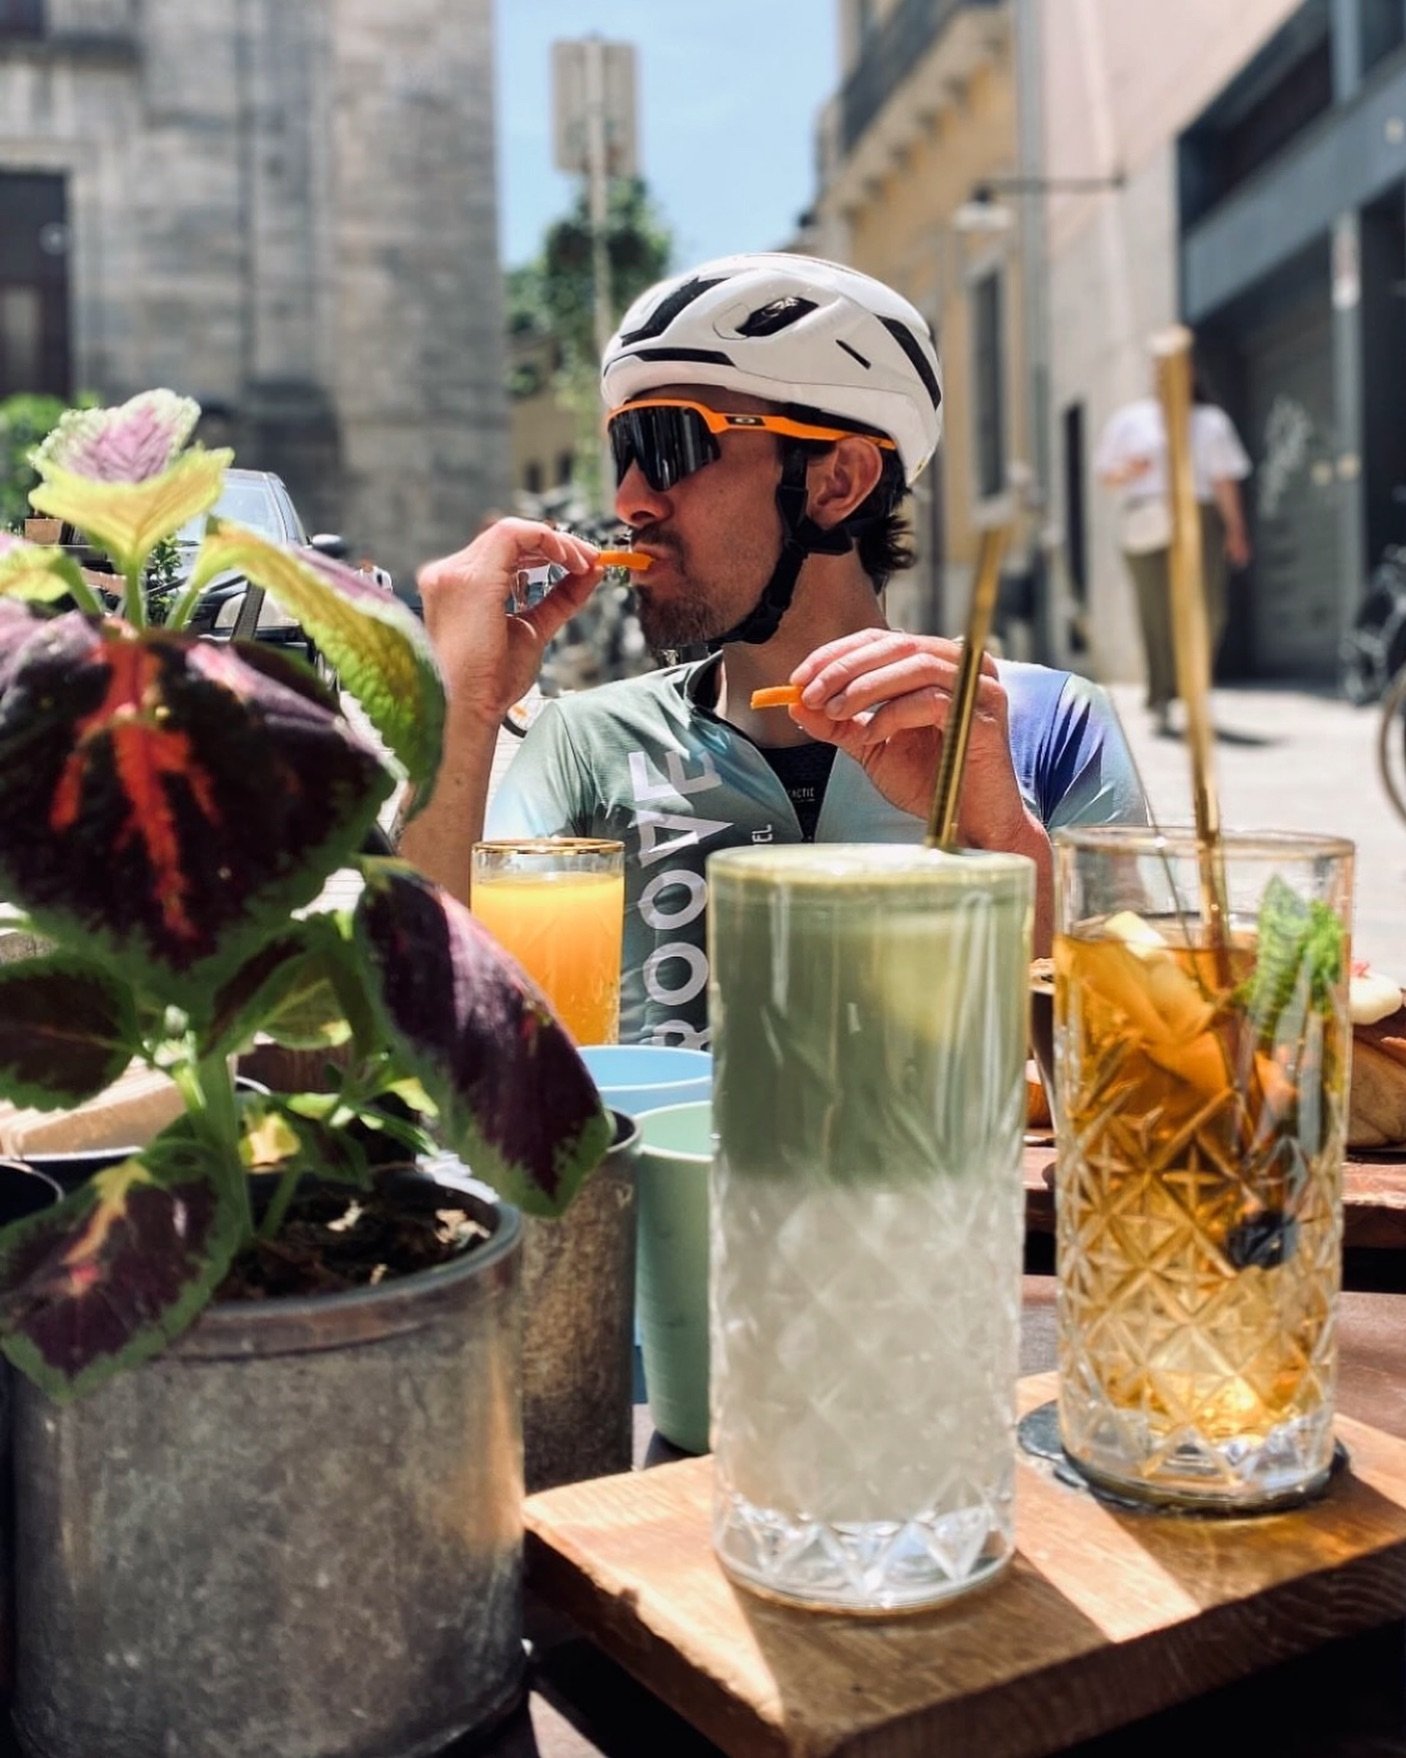 Happy Monday! What did you do on your weekend? We were lucky enough to have perfect weather, see our friends and spend a few hours wandering around Girona enjoying the Temps de Flors display 🌺 - pictured here is our iced matcha and iced tea 🤩

Feli